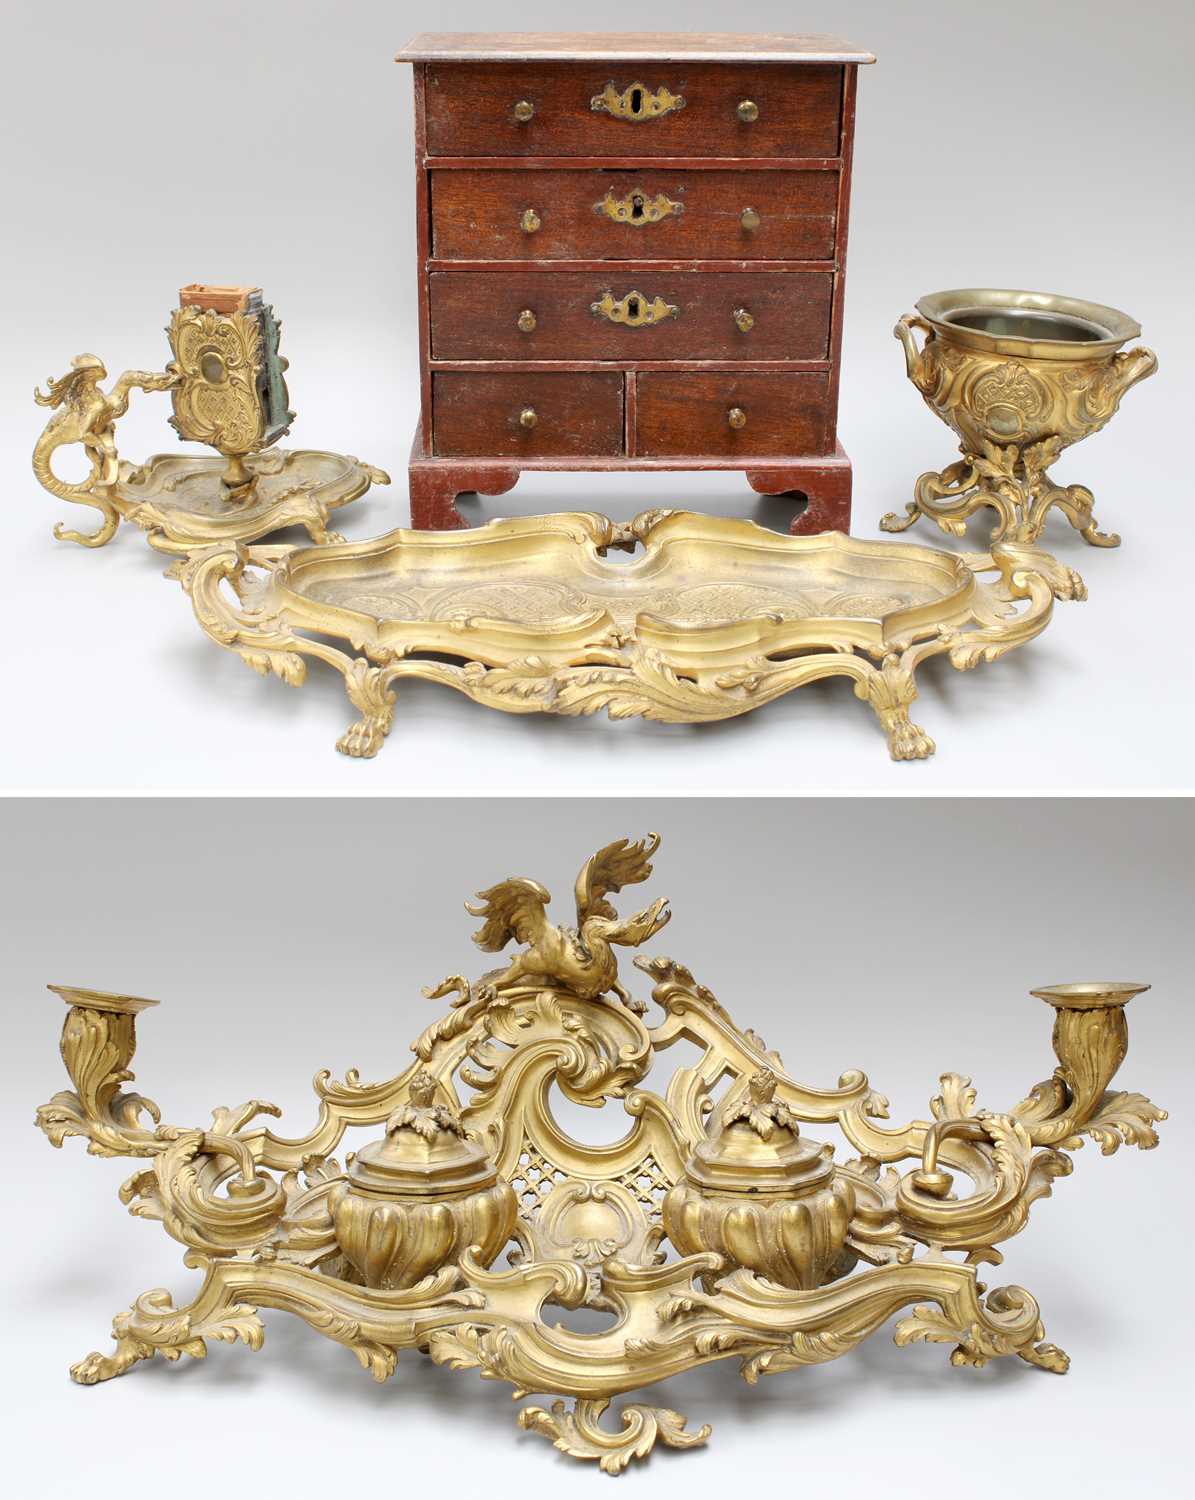 A French Gilt Bronze Desk Set, late 19th century, in Neo-Rococo style, comprising: an ink stand